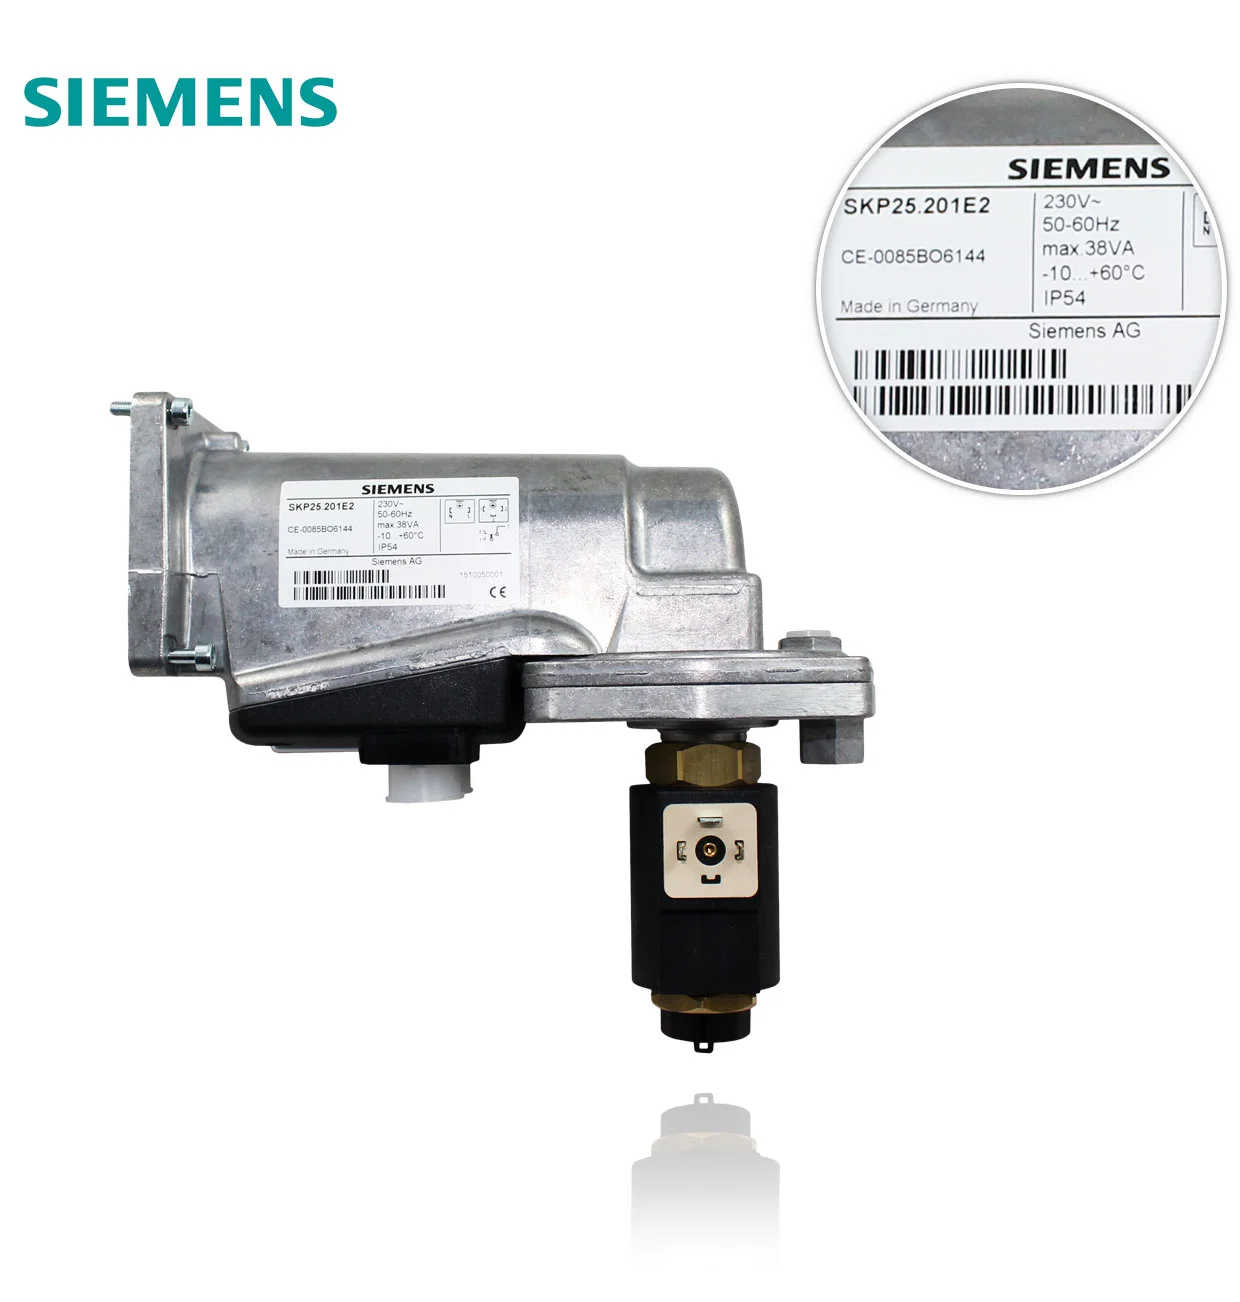 Siemens Valve Actuator Skp25.001e2 Skp75.003e2 Burner Accessories Supplied by Chinese Factories Are a Complete Series of Original and Authentic Products